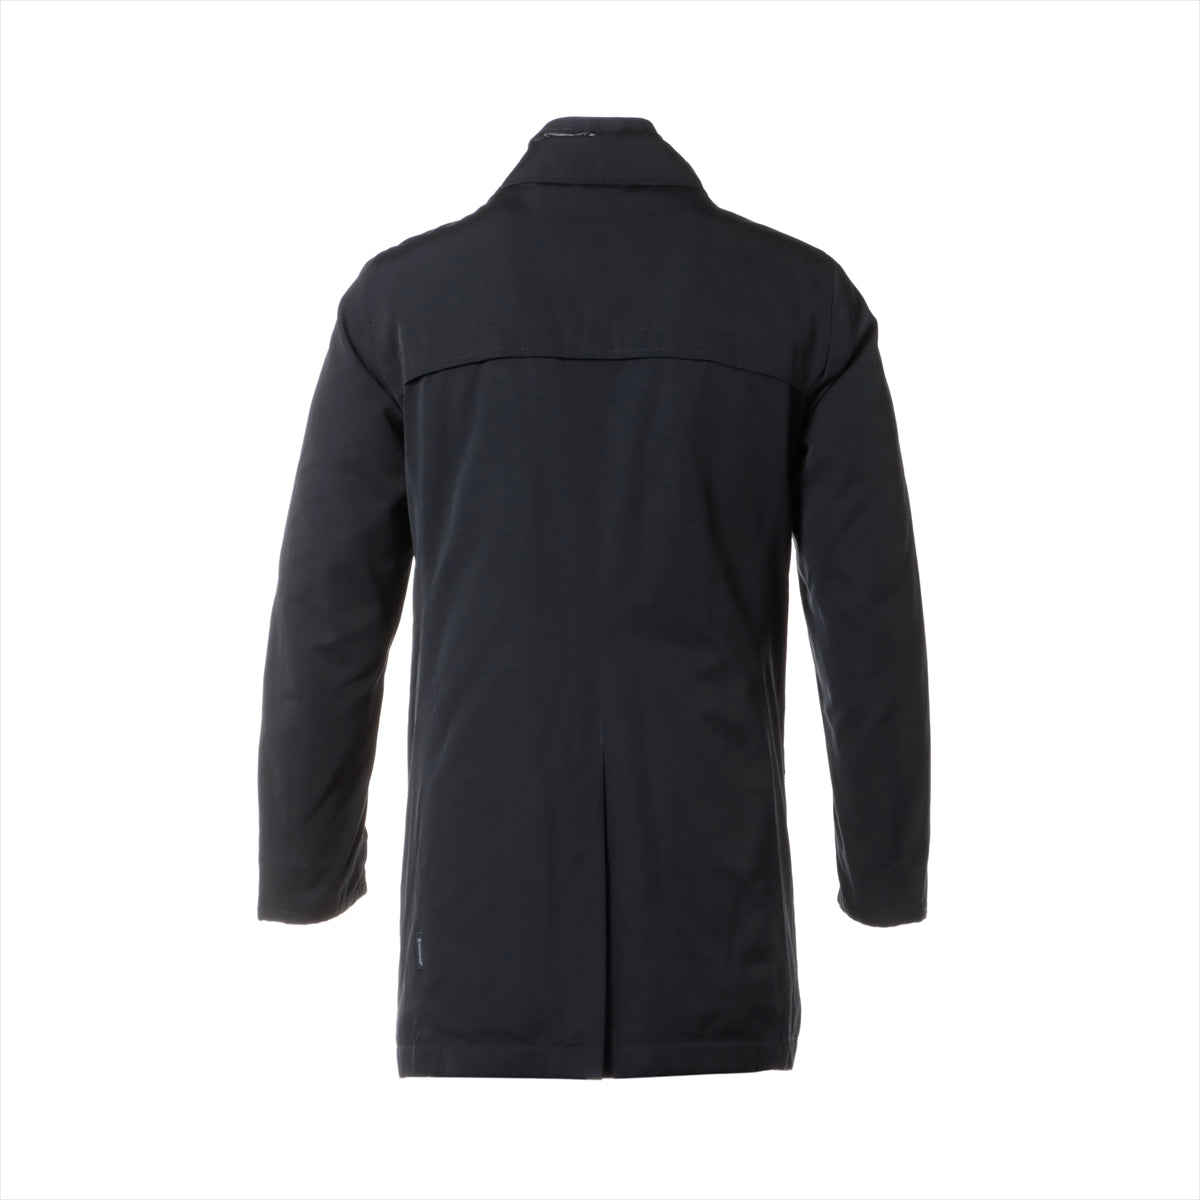 Moncler 11 years Cotton x polyester x nylon Down coat 0 Men's Navy blue  GASPARD Removable liner collar